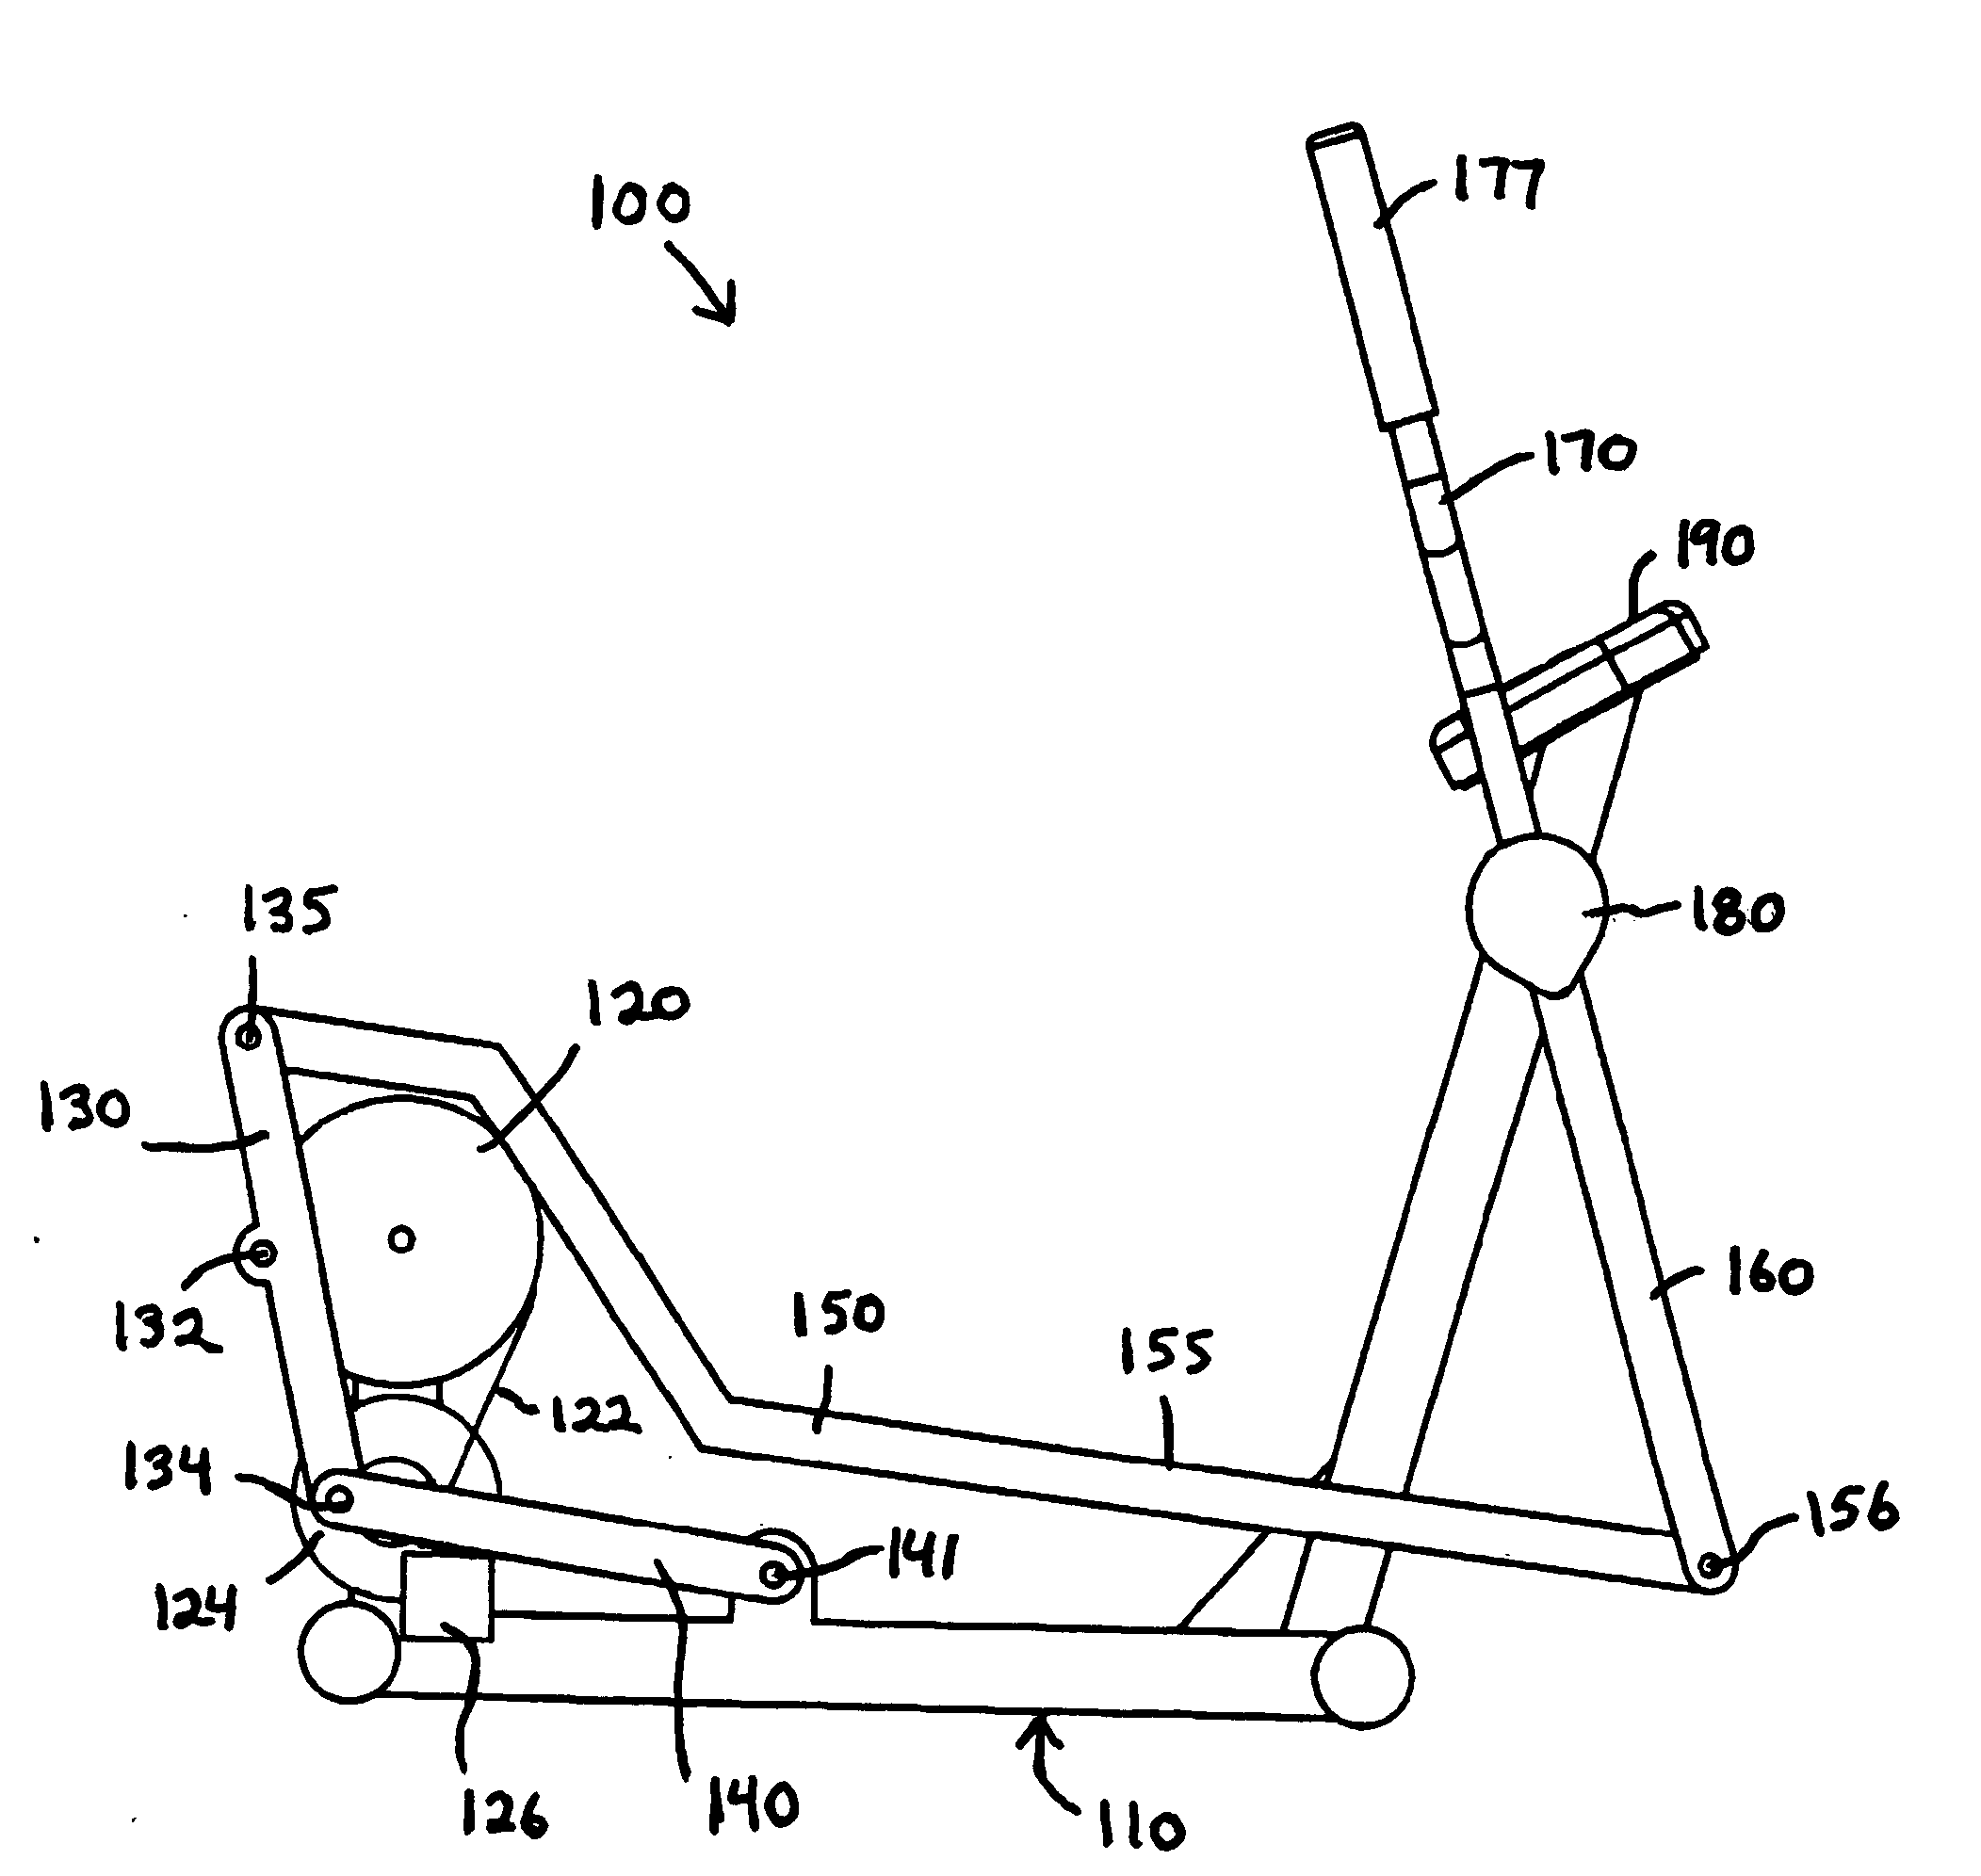 Total body exercise methods and apparatus